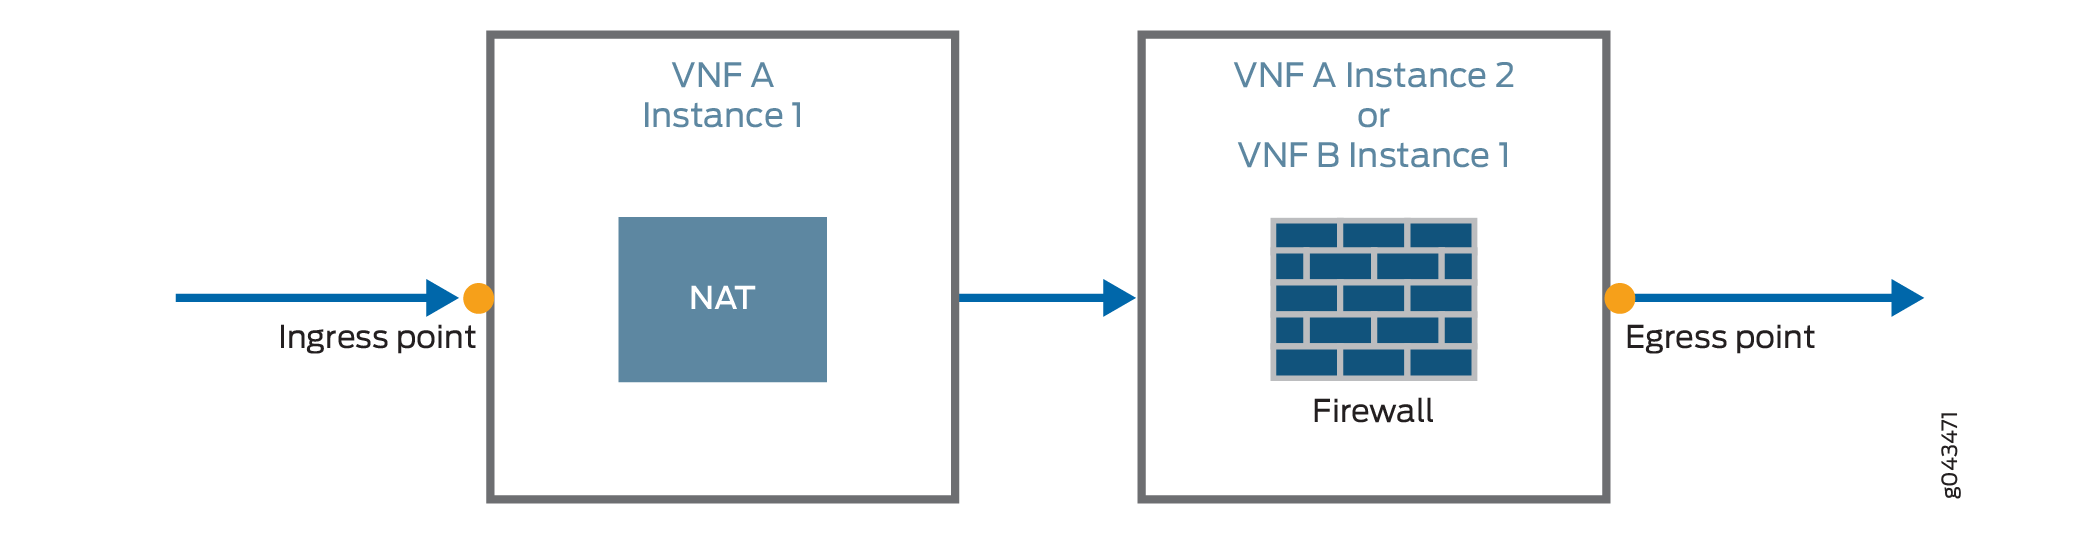 Service Chain with Either Multiple
Instances of the Same VNF or Multiple VNFs 